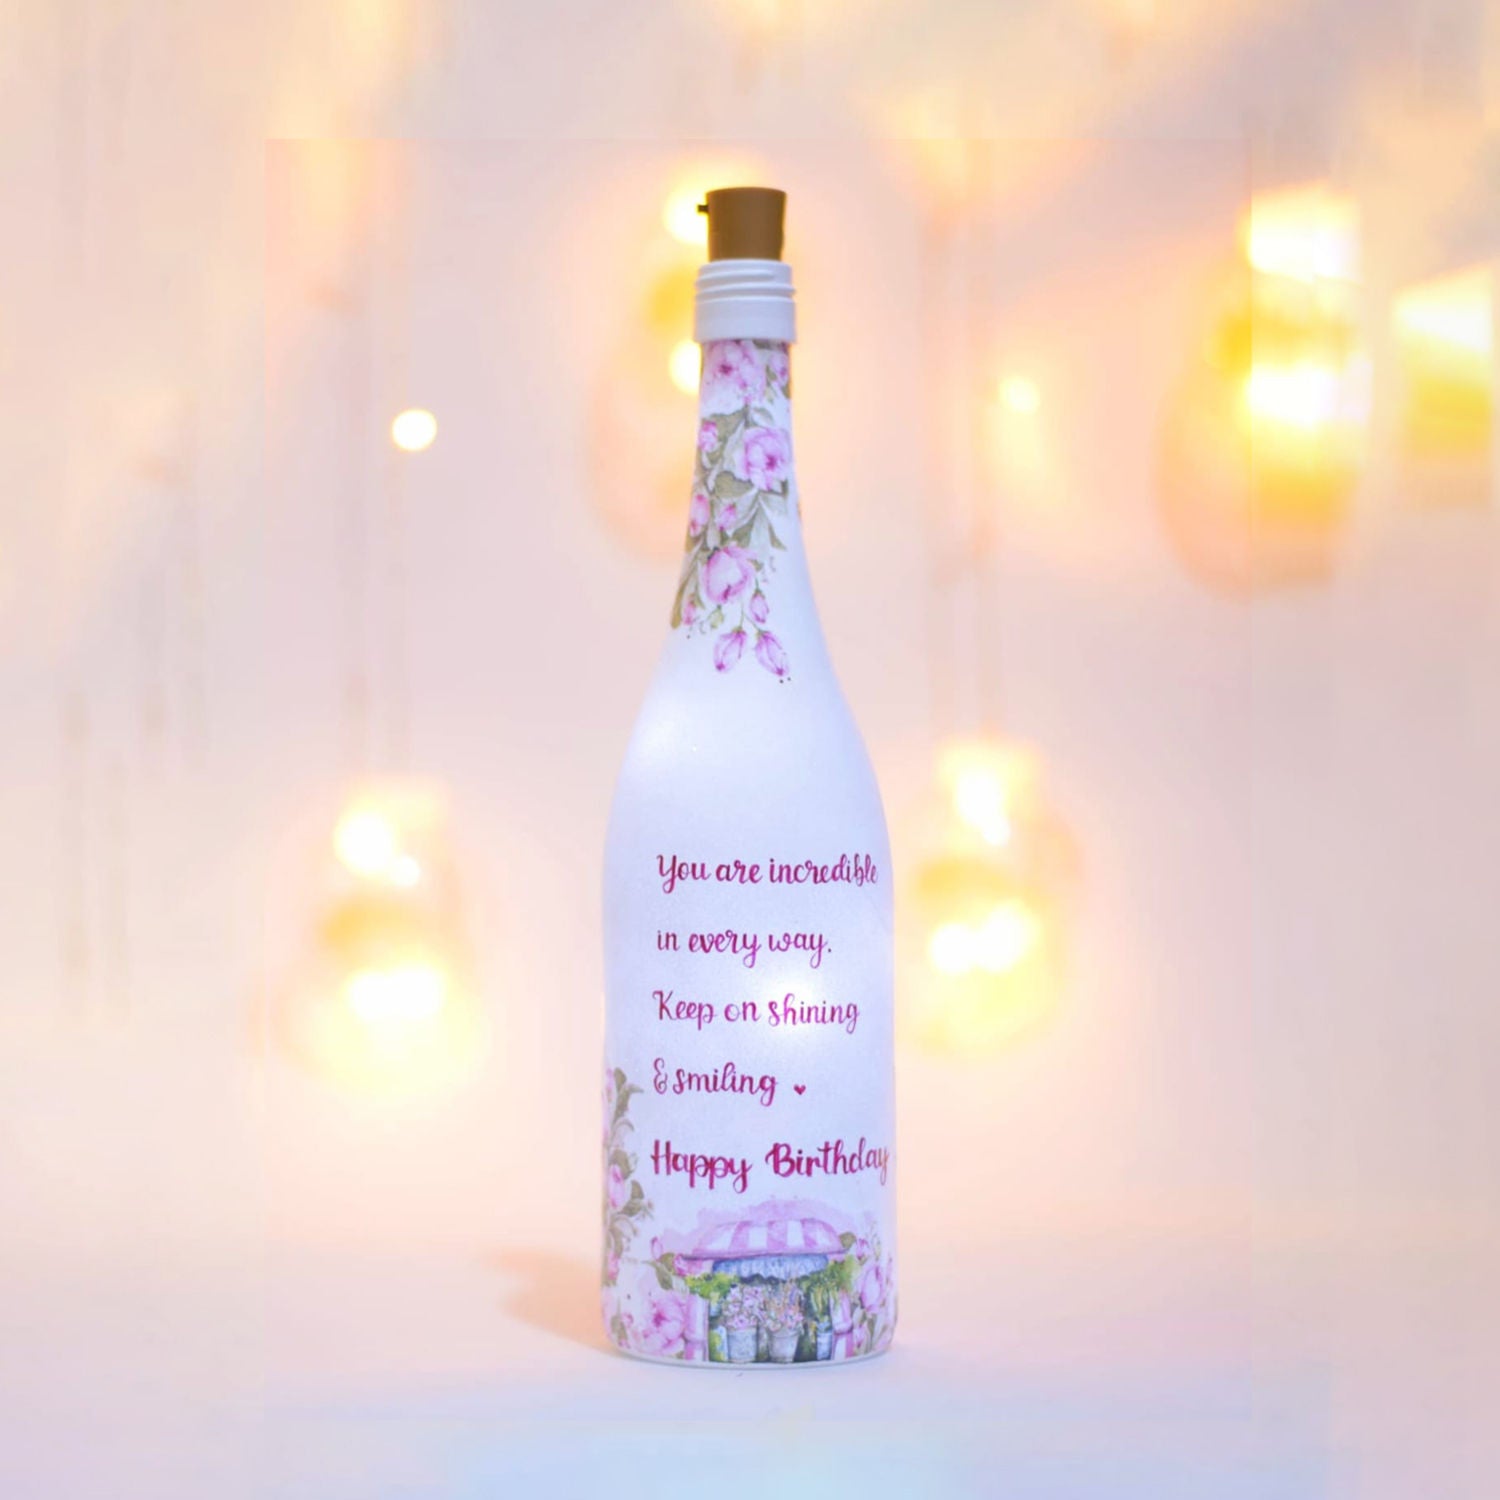 Happy Birthday Hand Painted Glass Bottle With Led Light